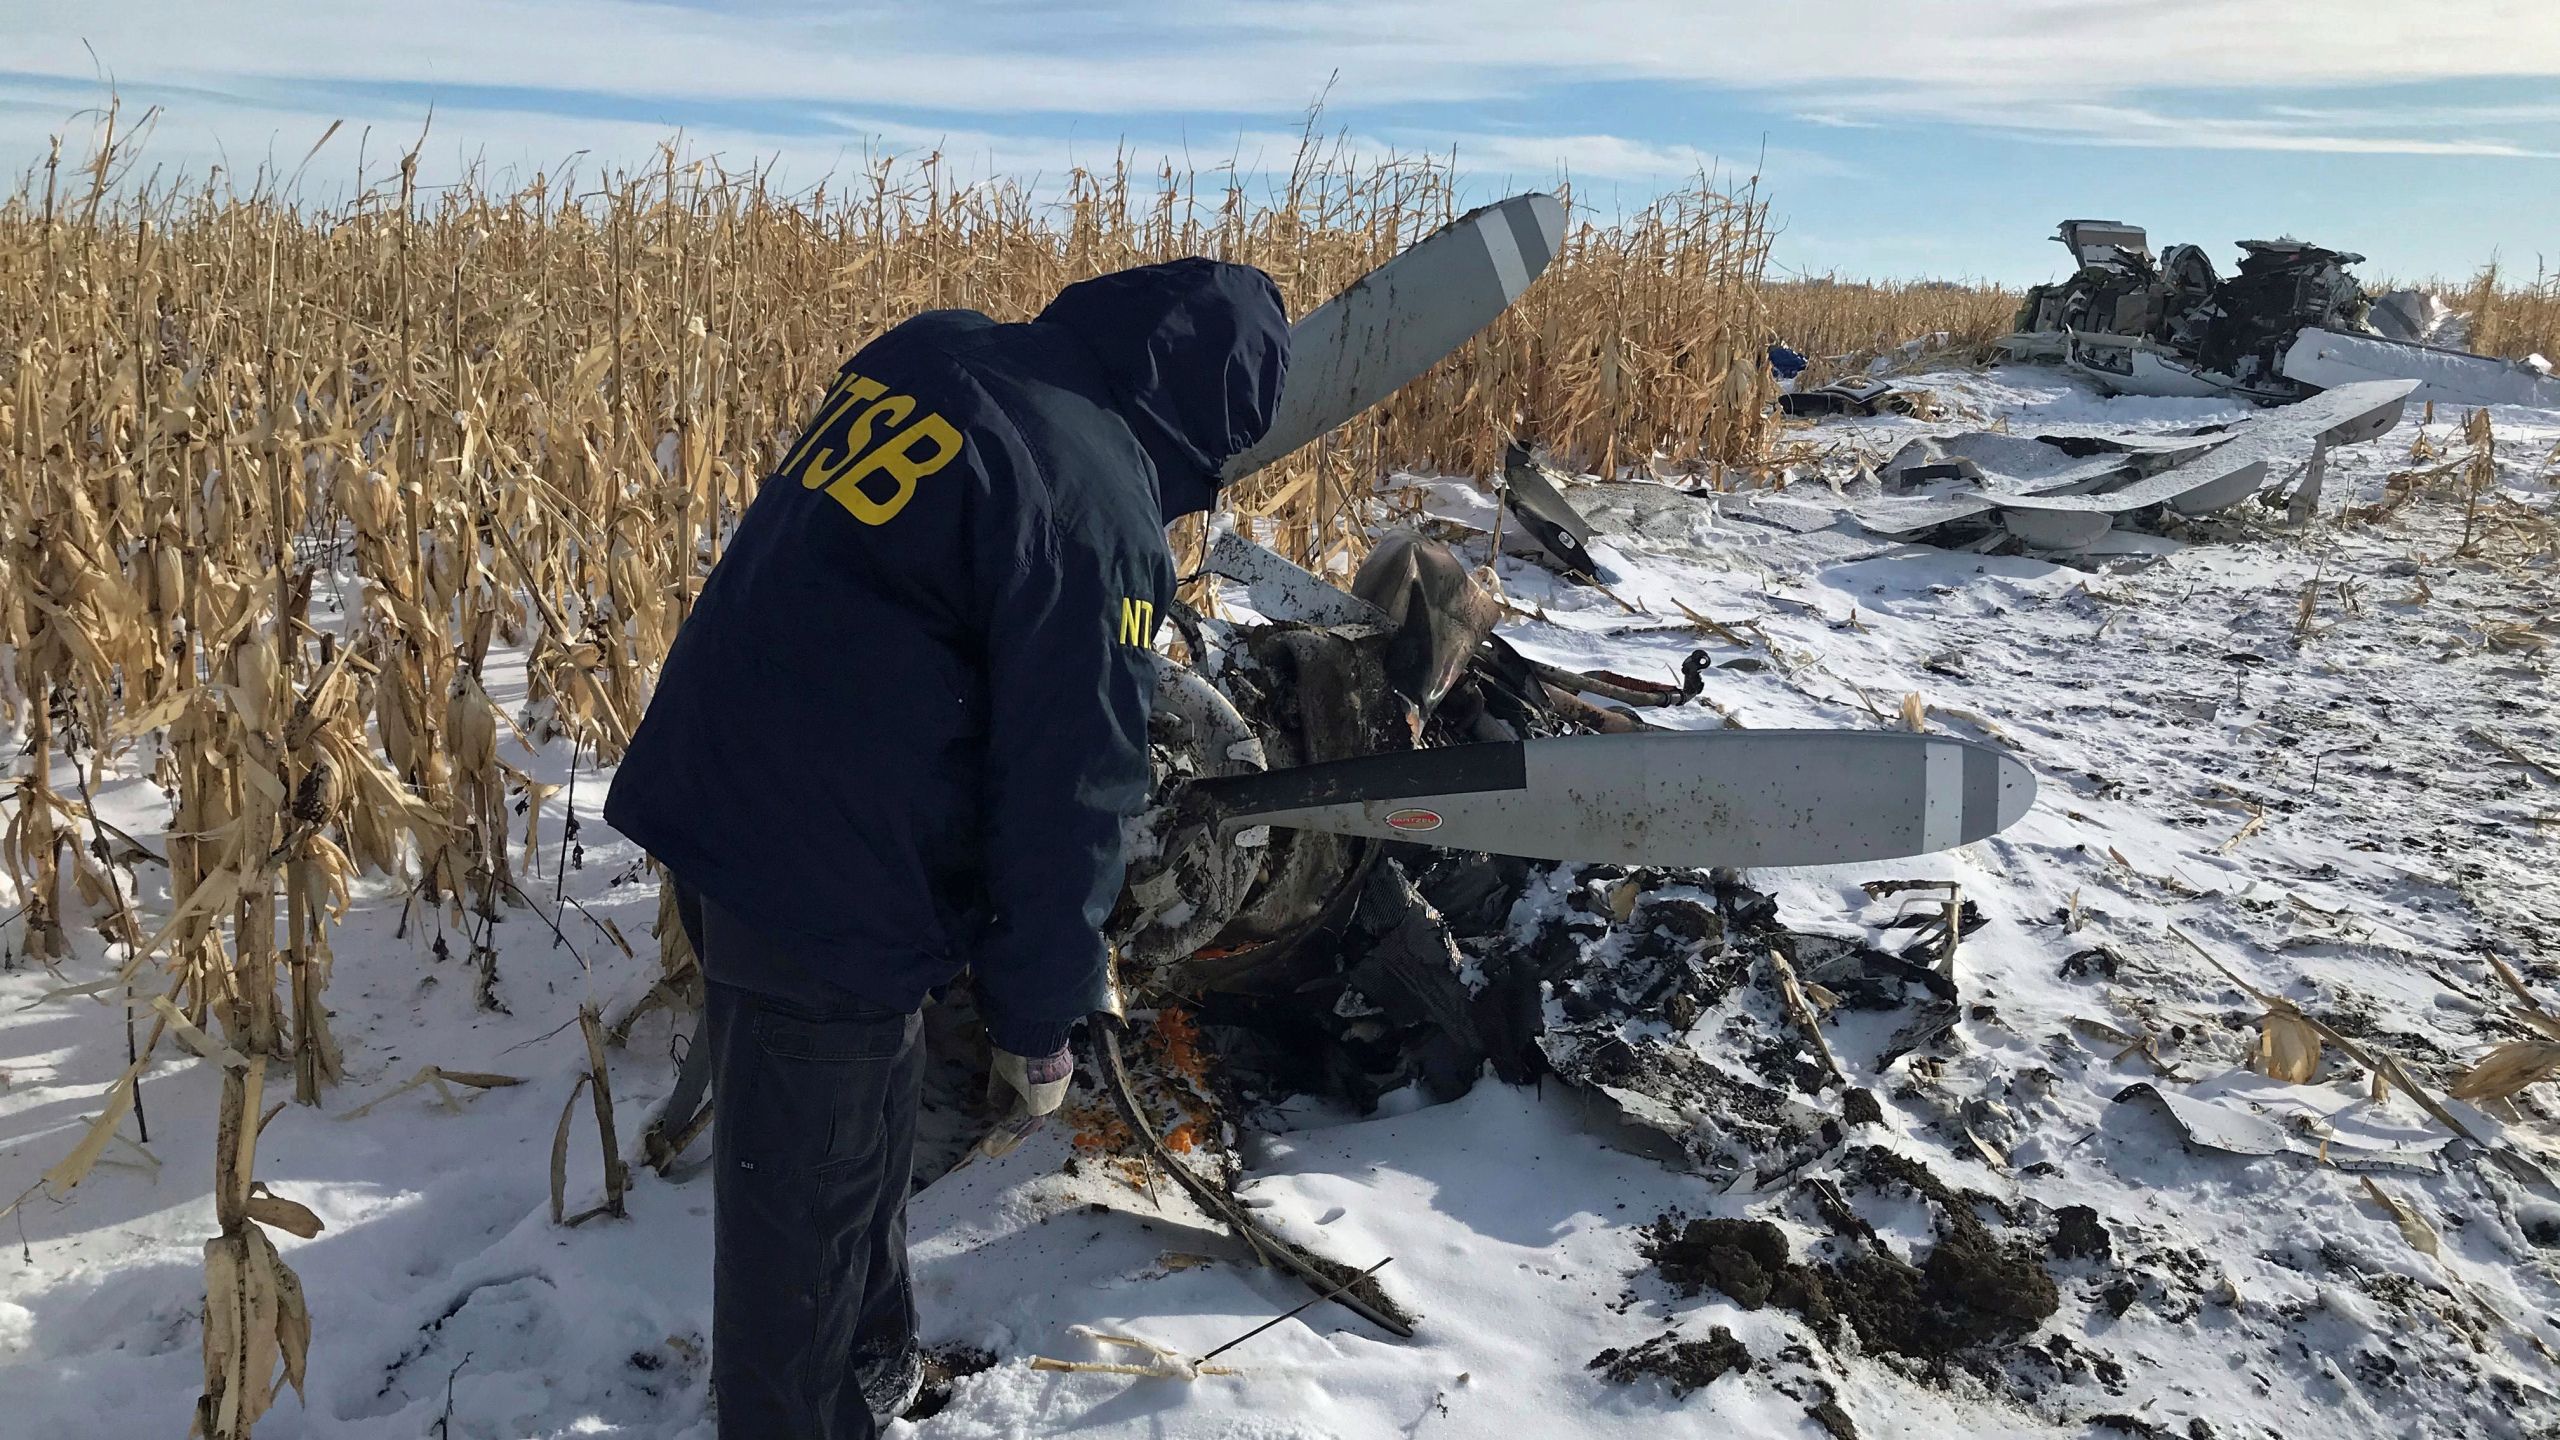 NTSB report shows events leading up to deadly South Dakota plane